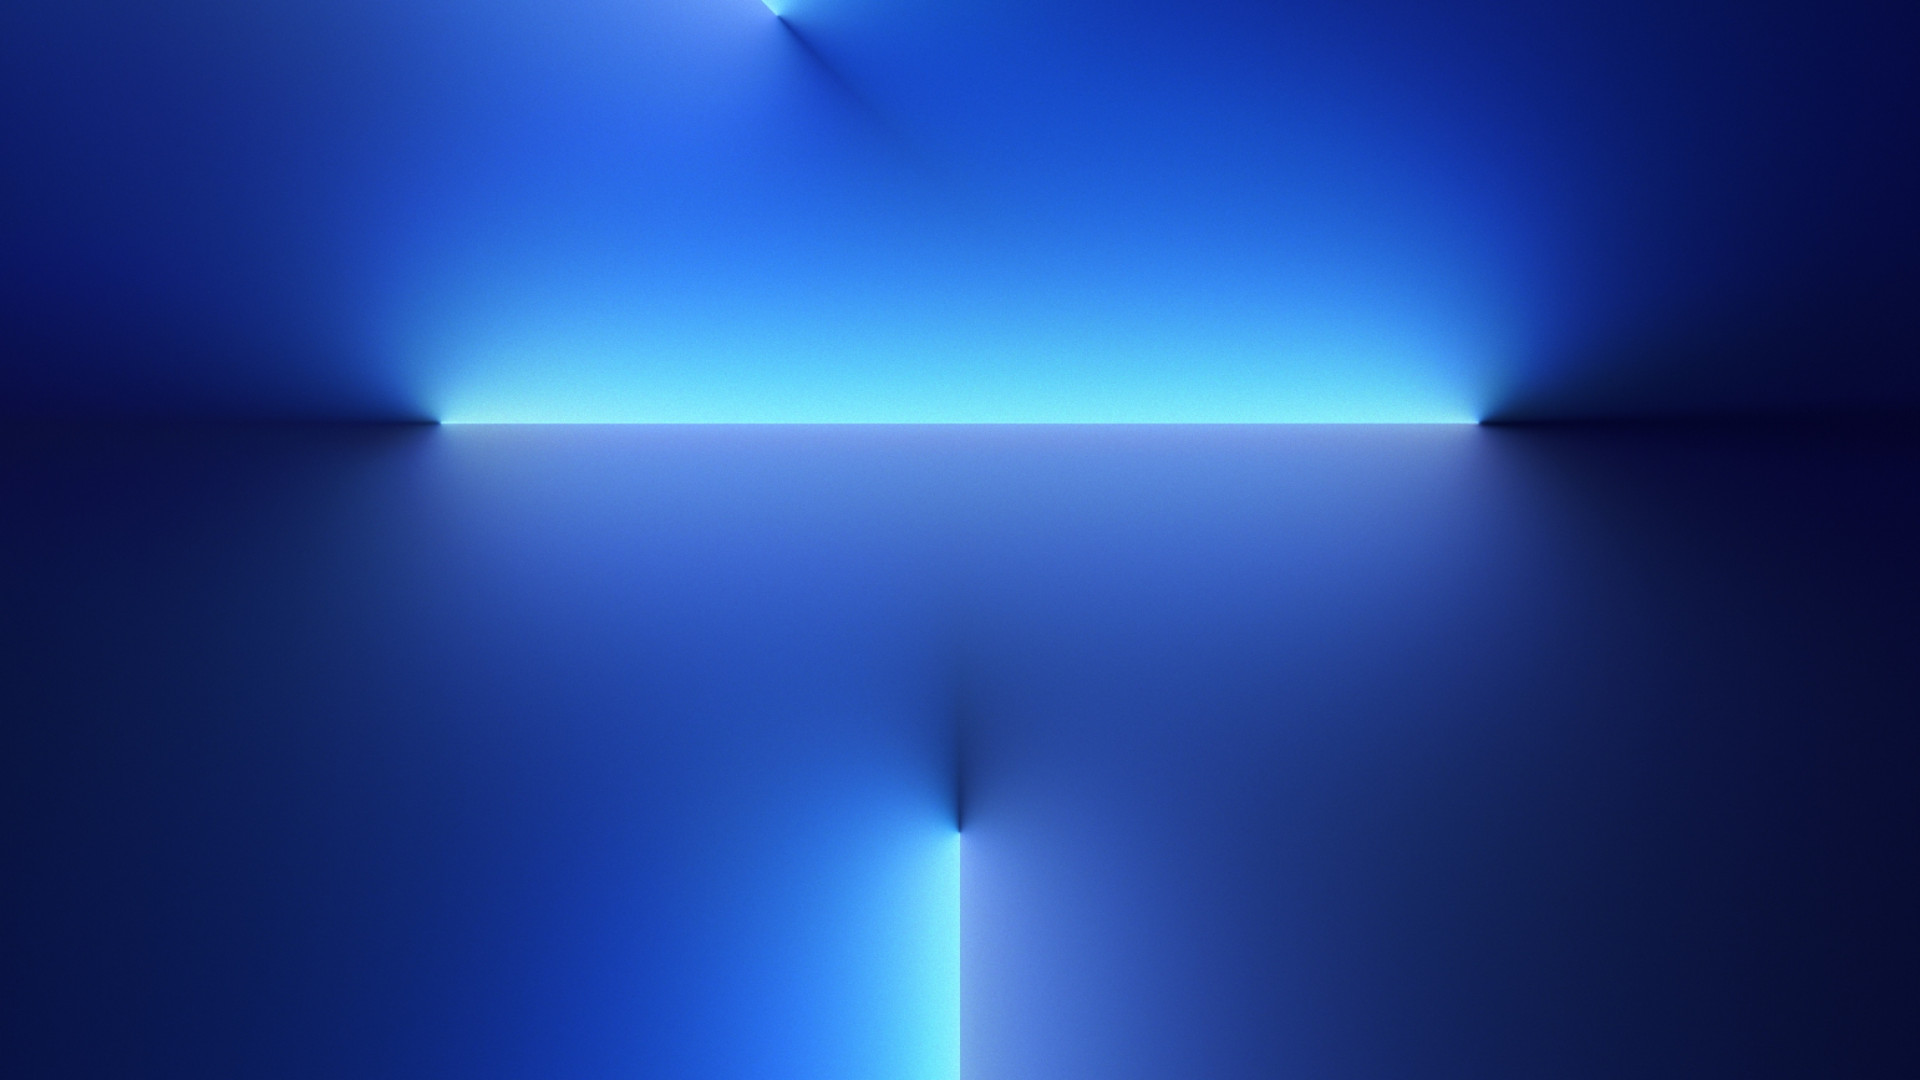 Wallpaper iPhone 13 Pro, light beams, abstract, iOS 15, Apple September  2021 Event, 4K, OS #23696